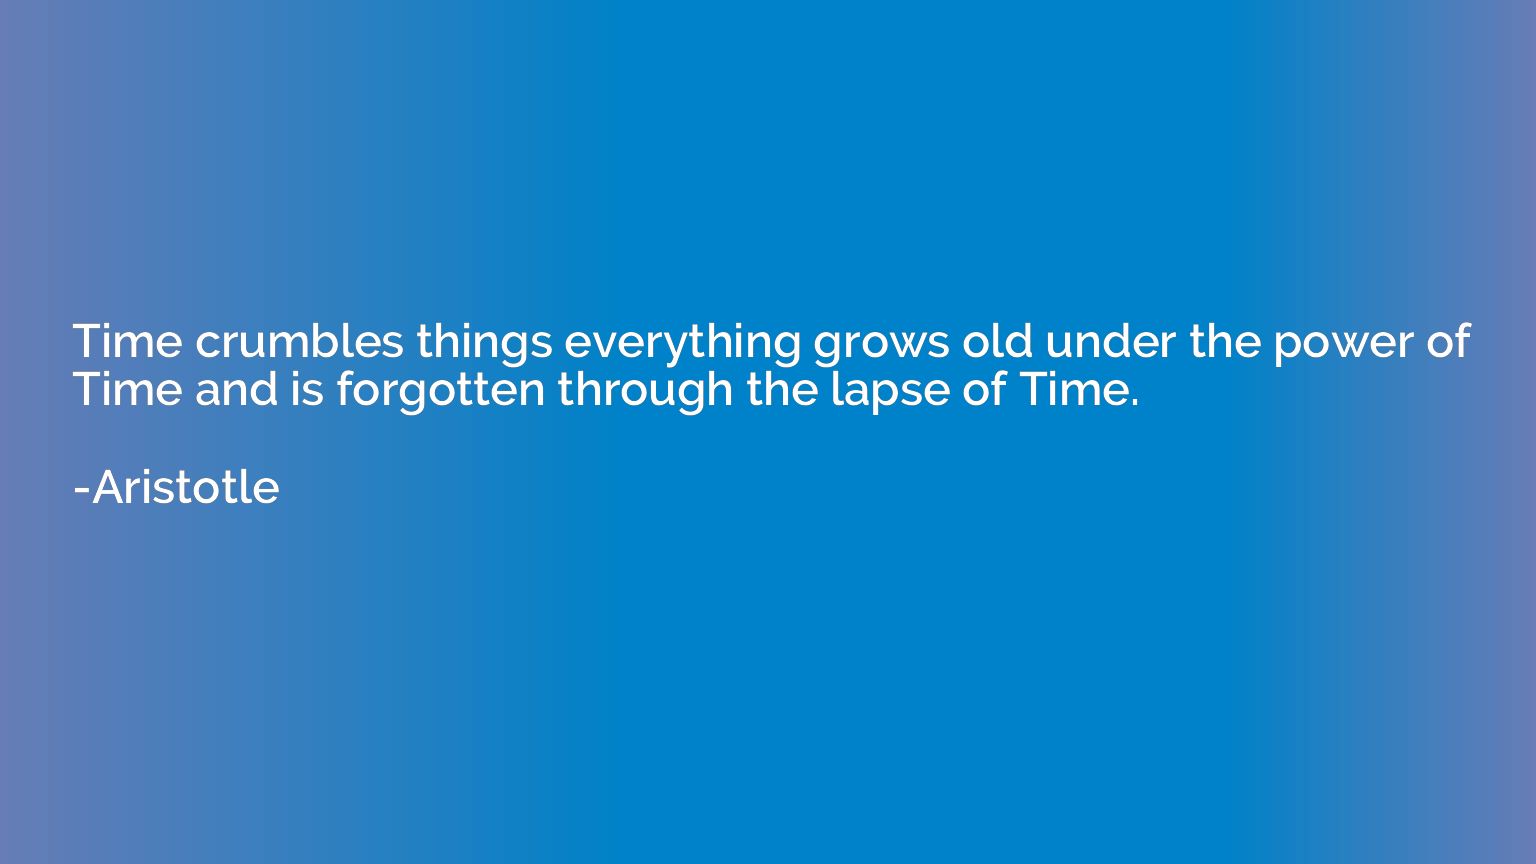 Time crumbles things everything grows old under the power of